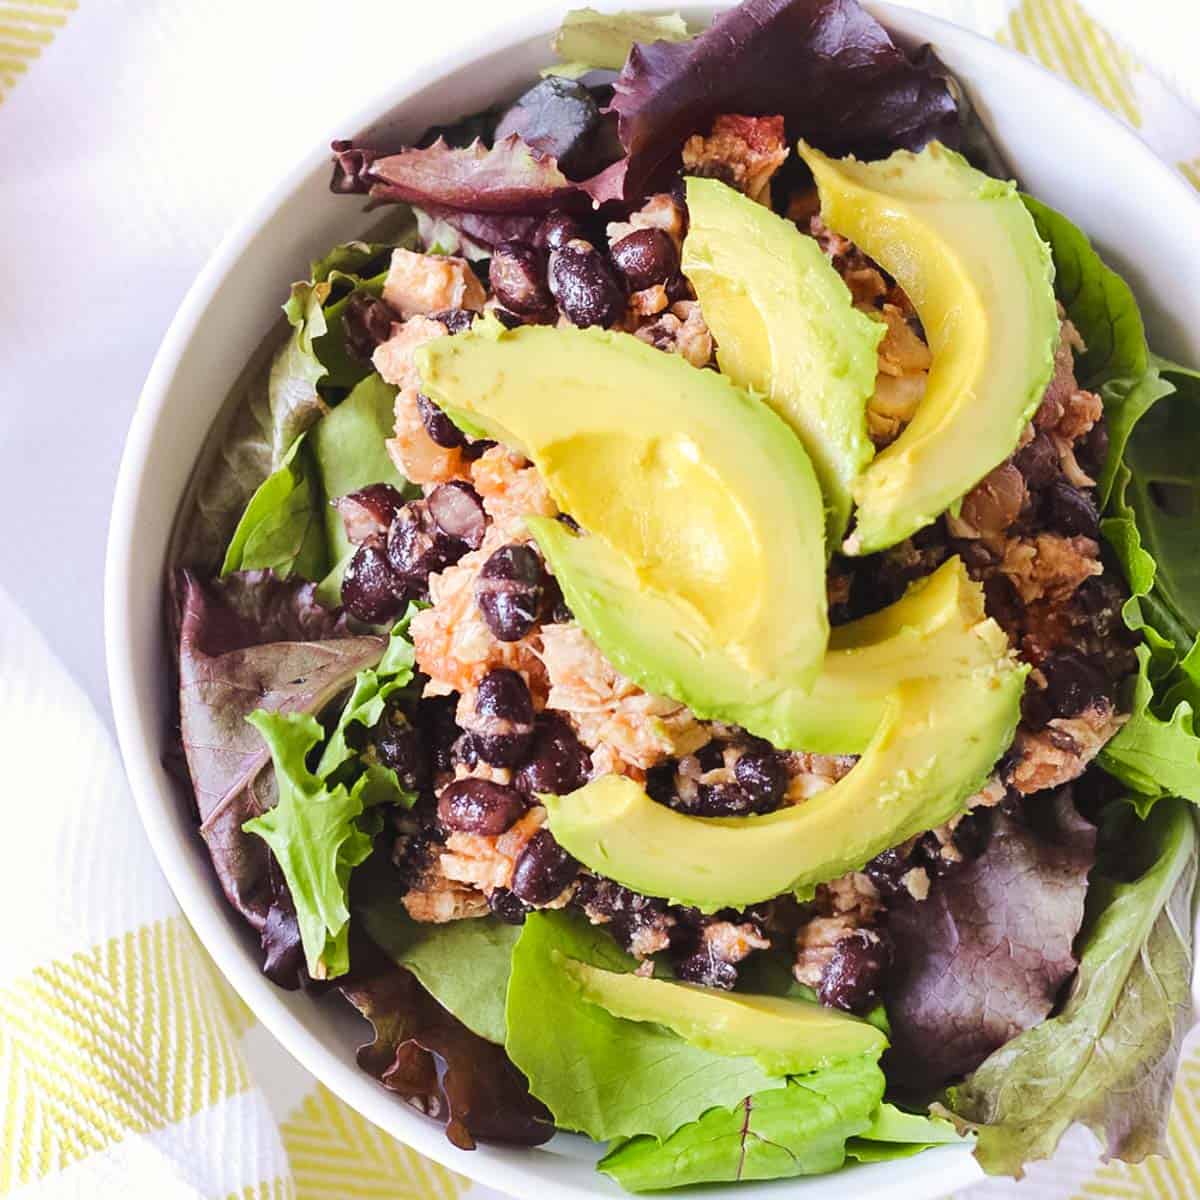 yellow and white towel under a white bowl with mixed greens, black bean tuna salad, and avocado.